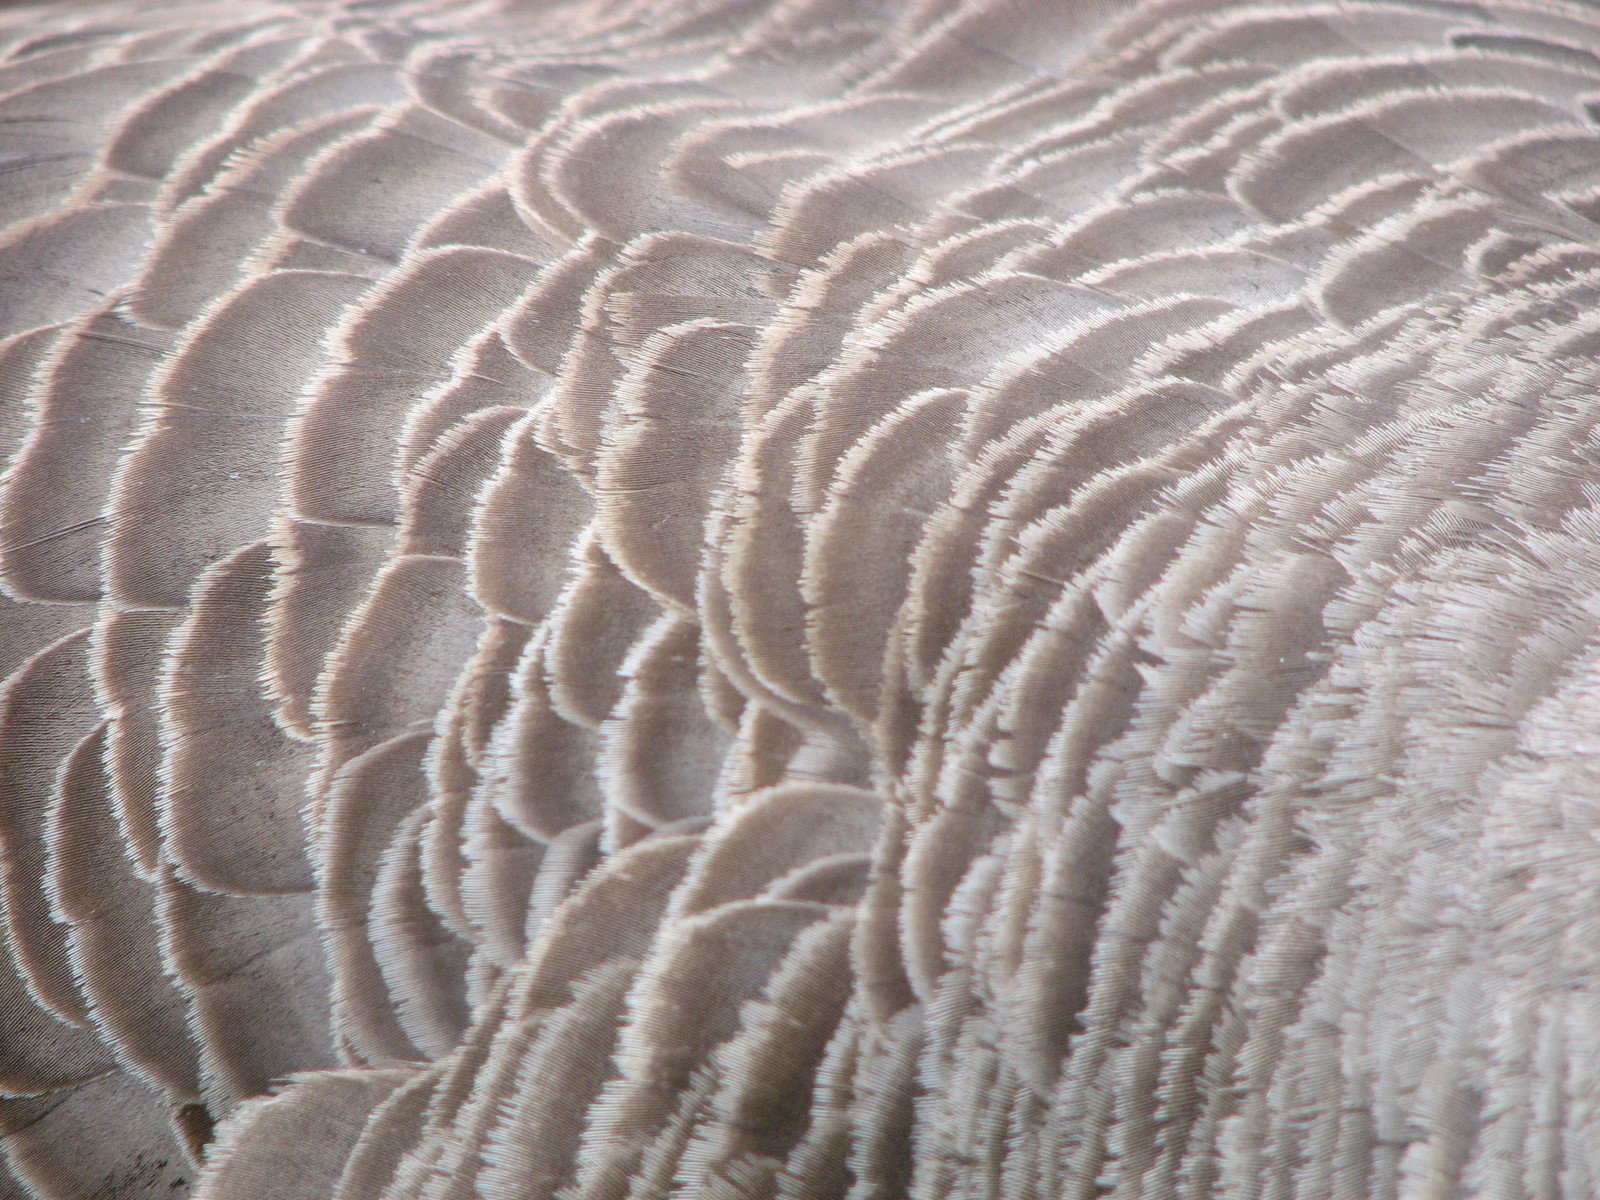 the texture of the feathers shows that the feathers look like they are really large